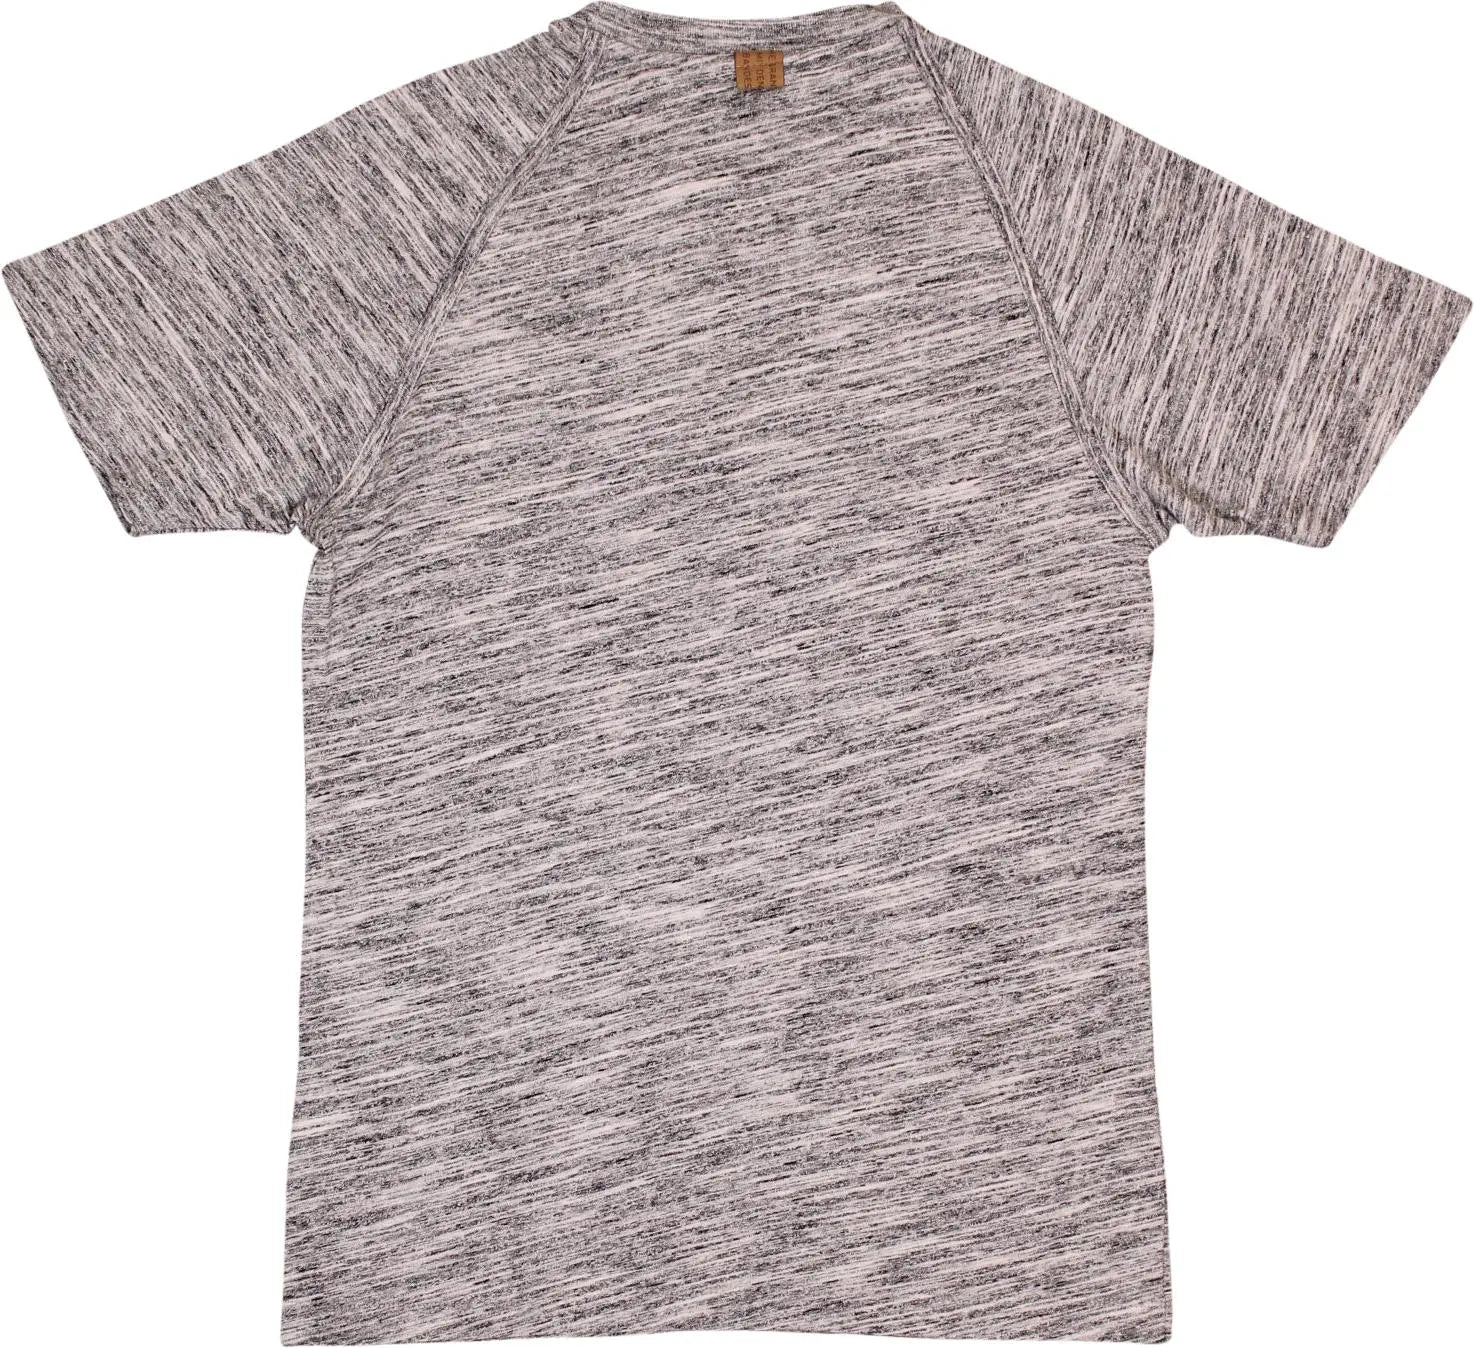 Adidas - Grey T-shirt by Adidas- ThriftTale.com - Vintage and second handclothing